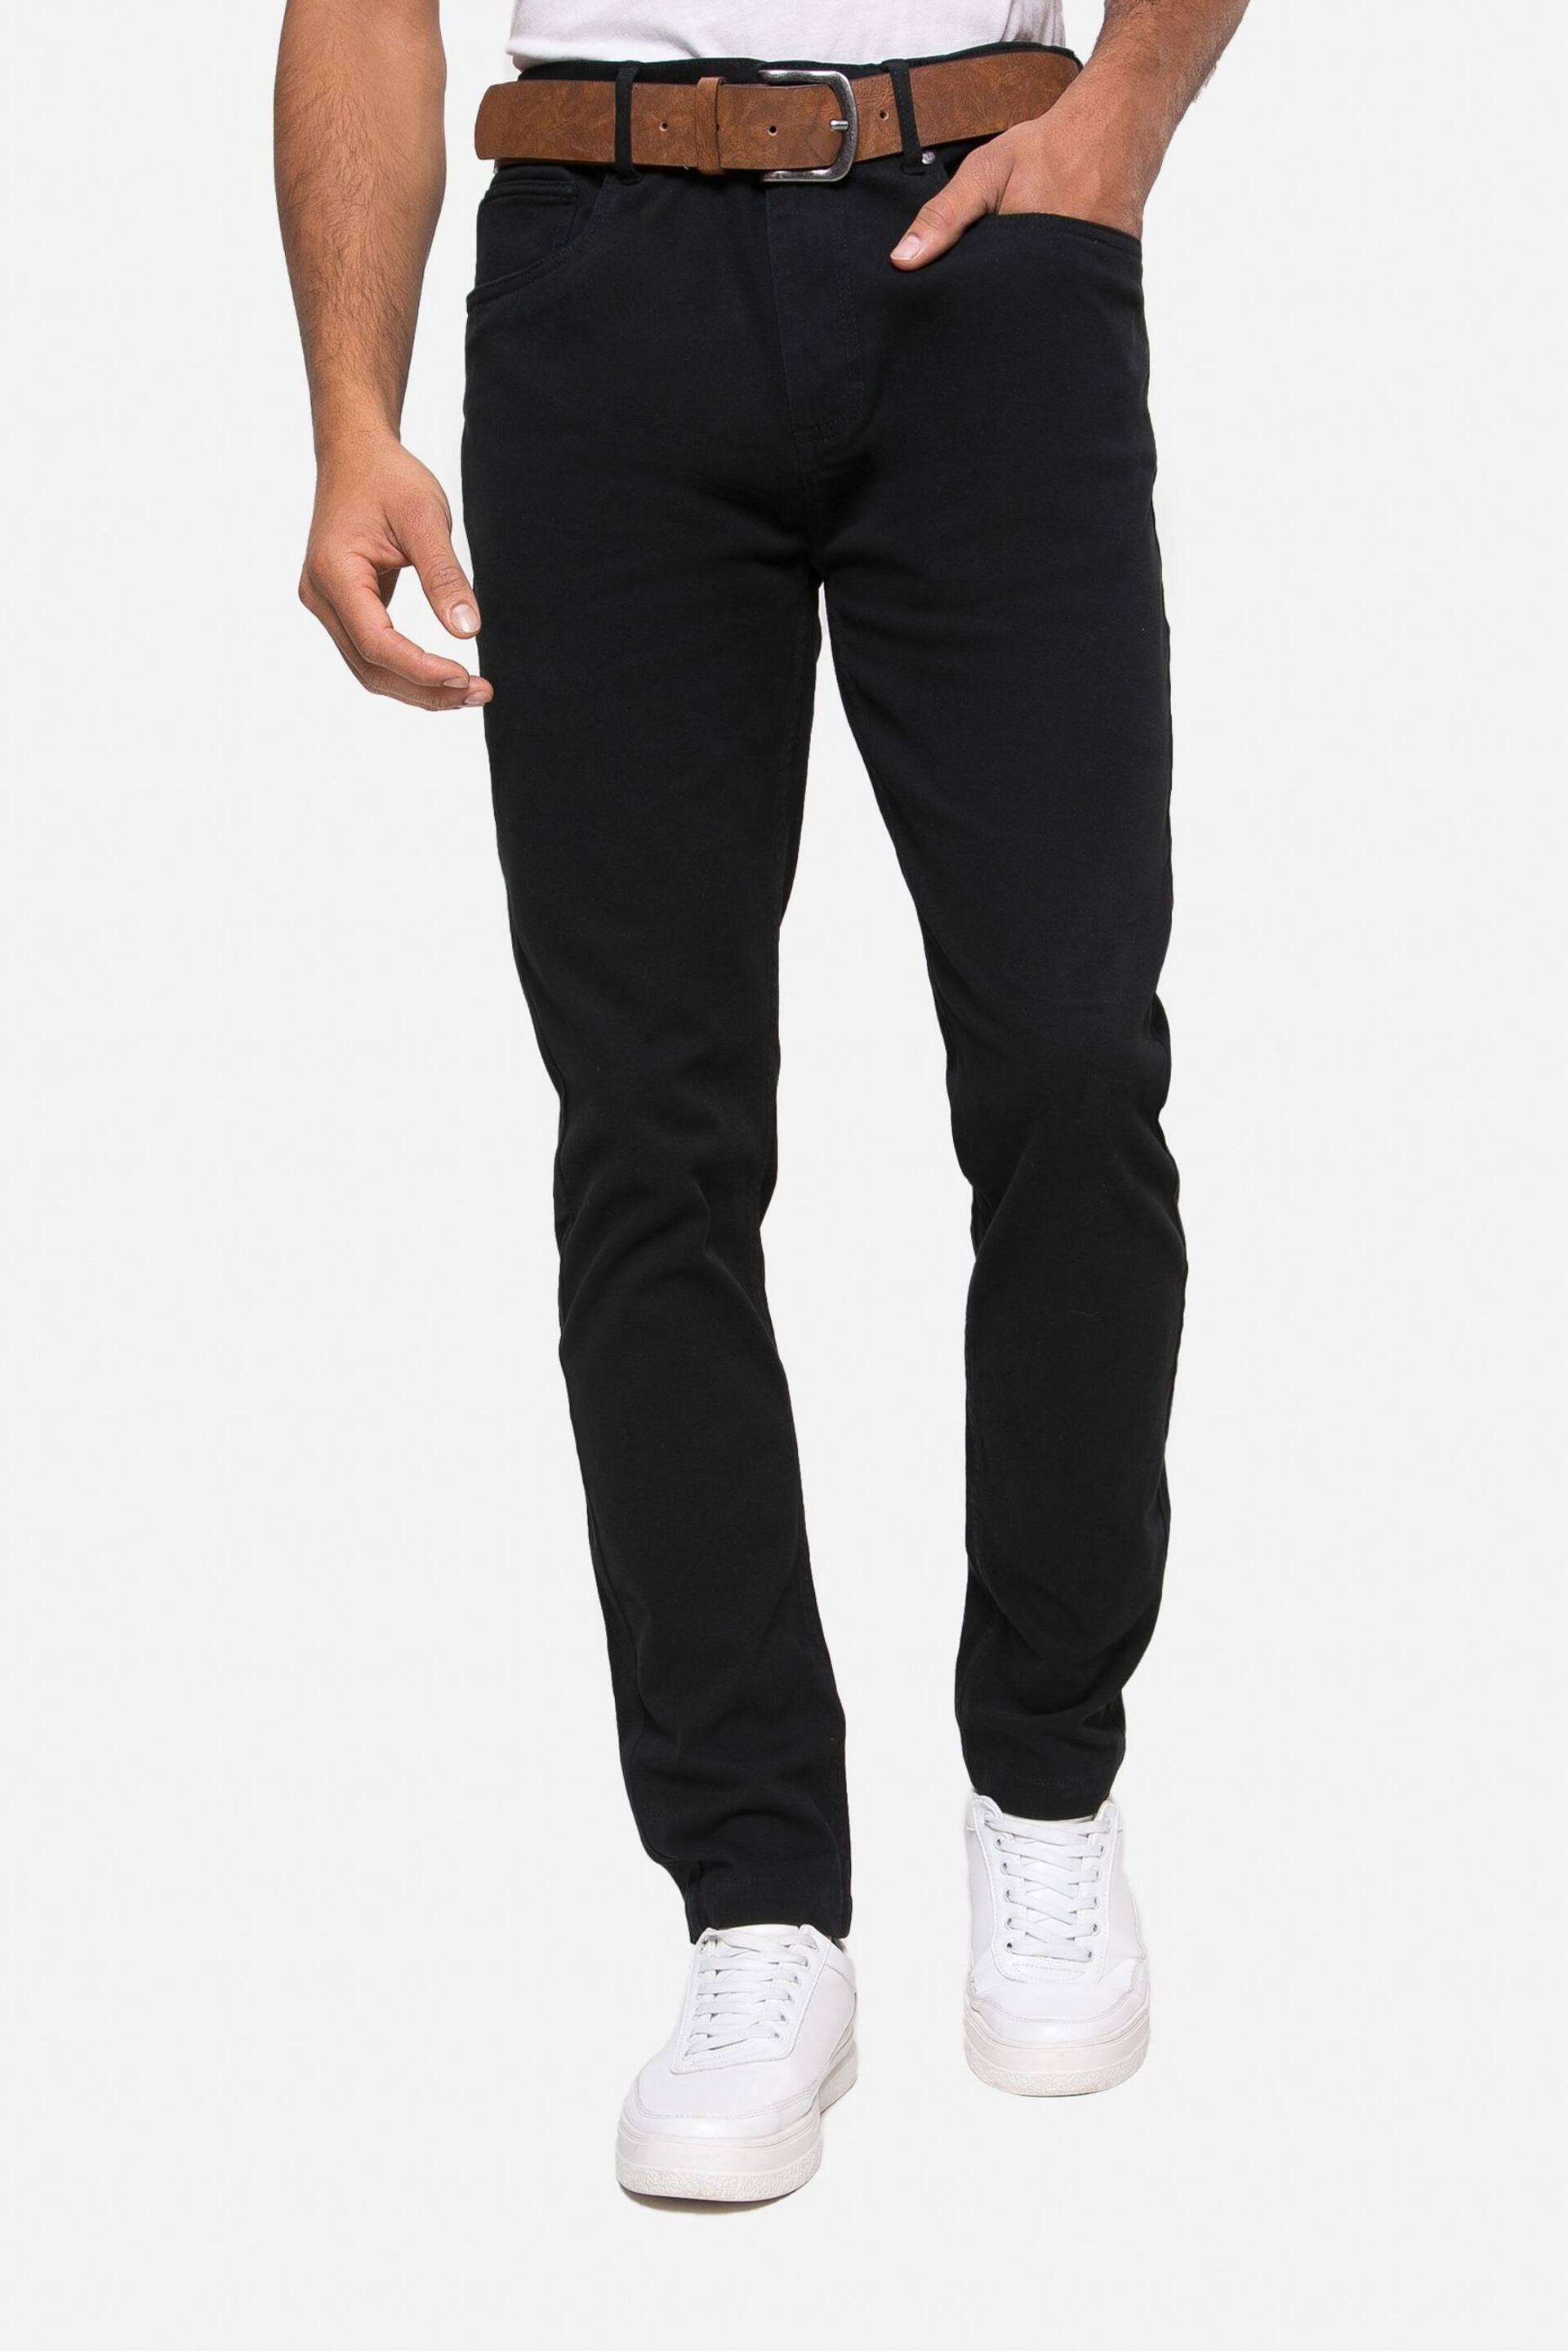 Threadbare Black Belted Stretch Chino Trousers - Image 1 of 4